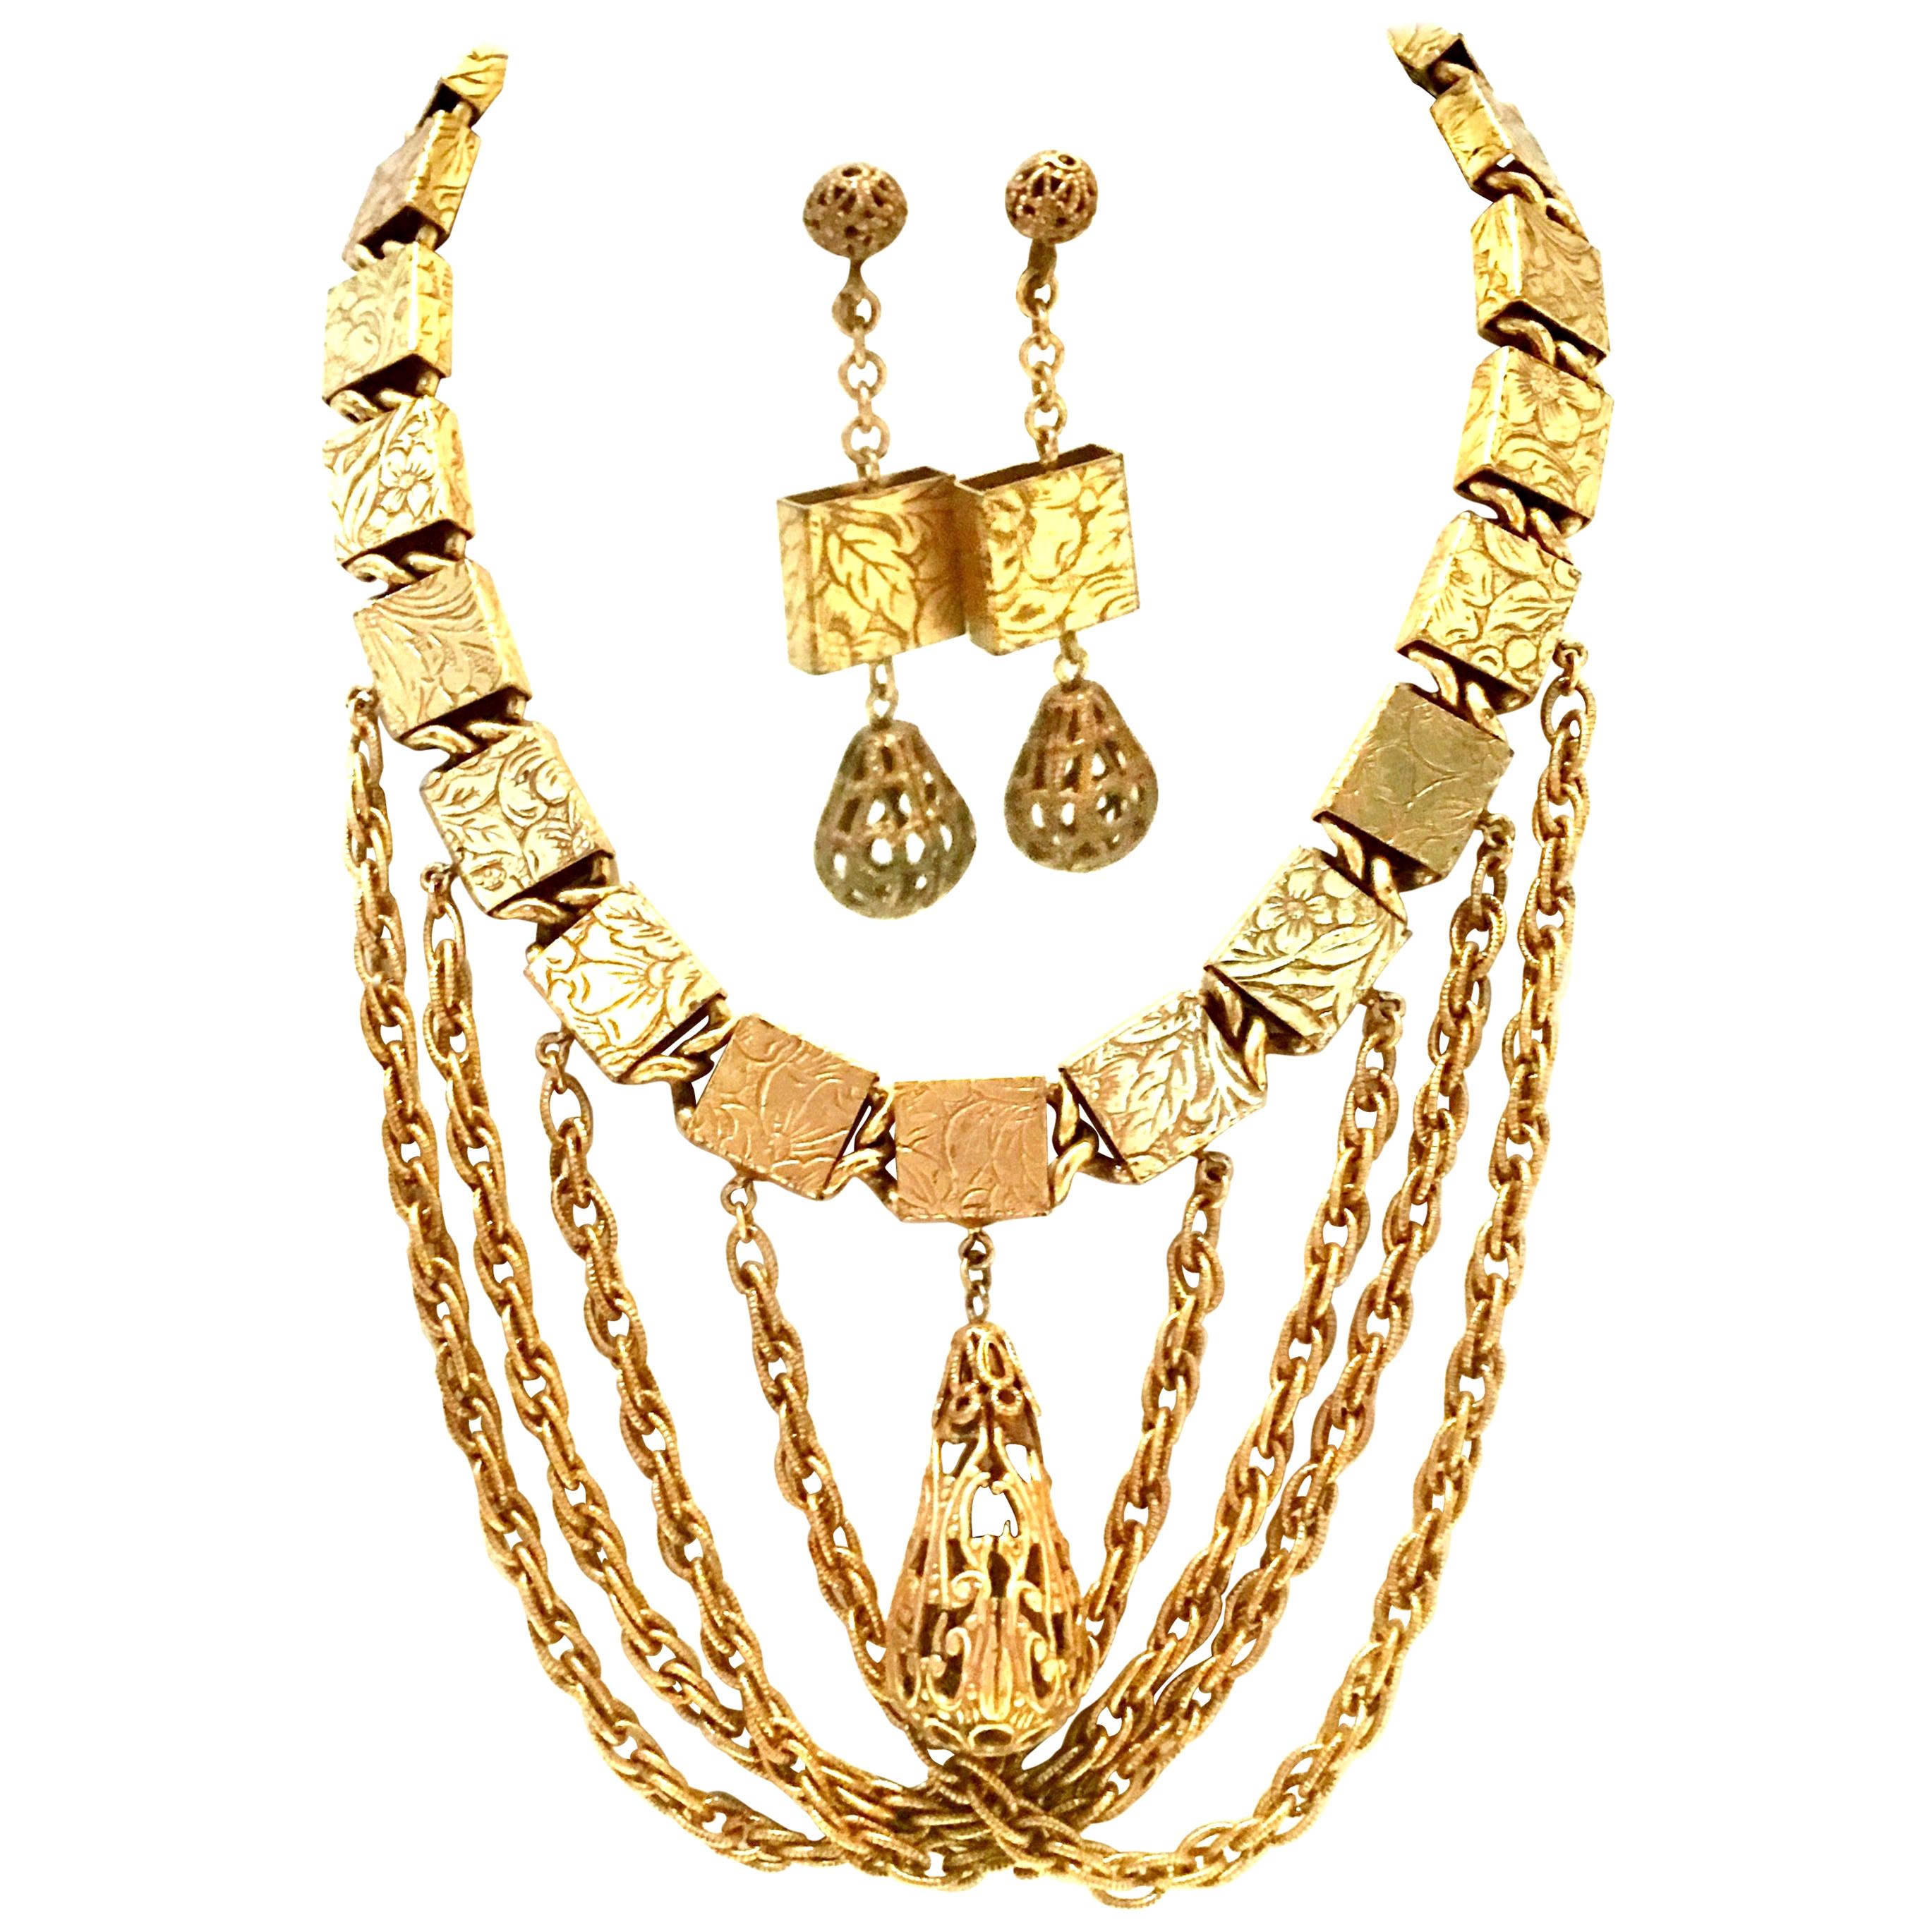 20th Century Art Nouveau Gold Book Chain Choker Style Necklace & Earrings S/3 For Sale